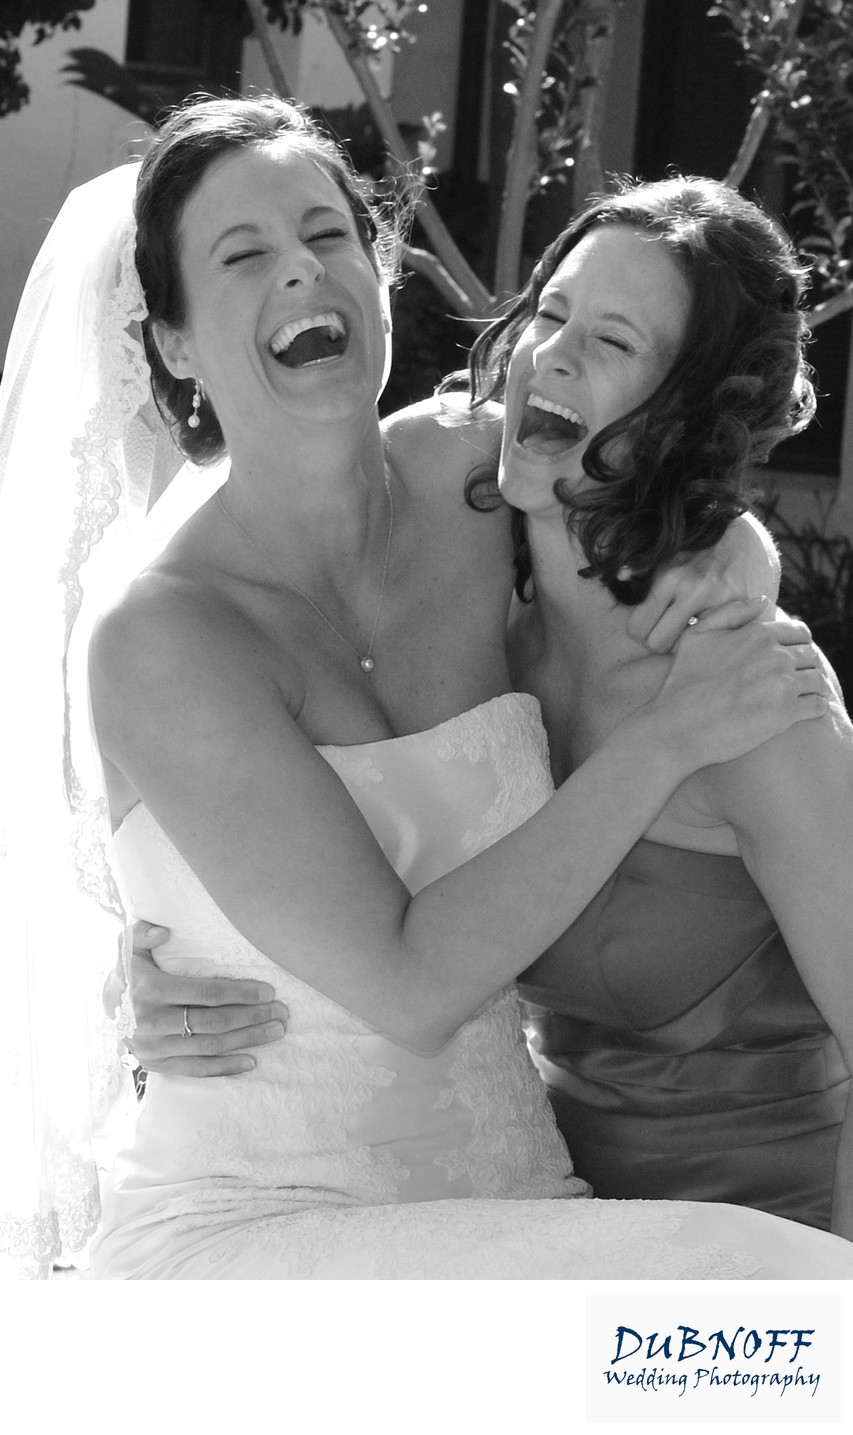 Twin Sisters Laughing together before the Brides Walnut Creek Wedding.